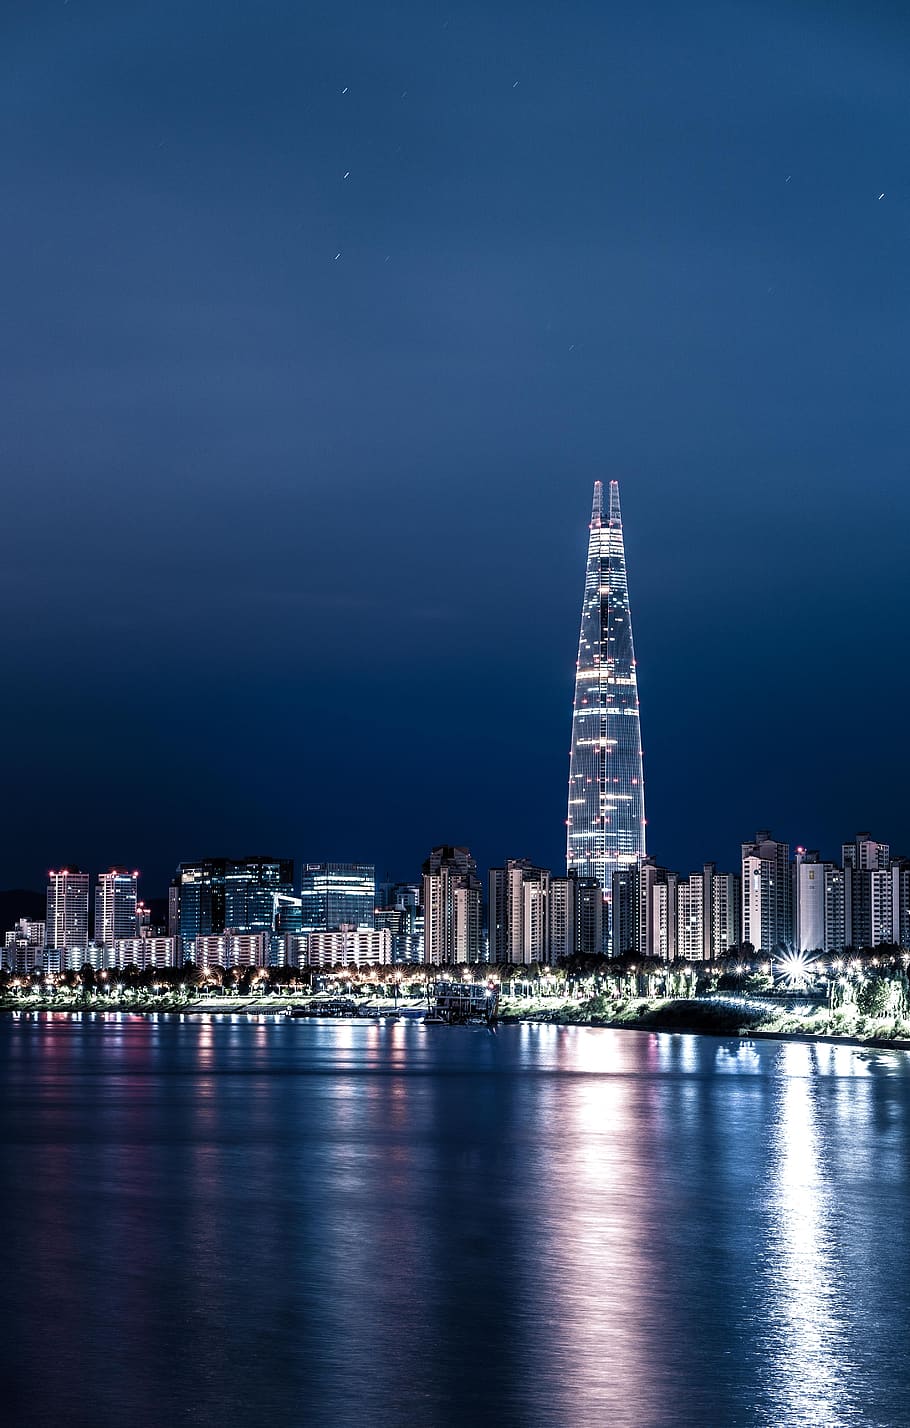 seoul, night view, city, han river, a night view of seoul, night scenery, night photography, lotte tower, tower, building exterior